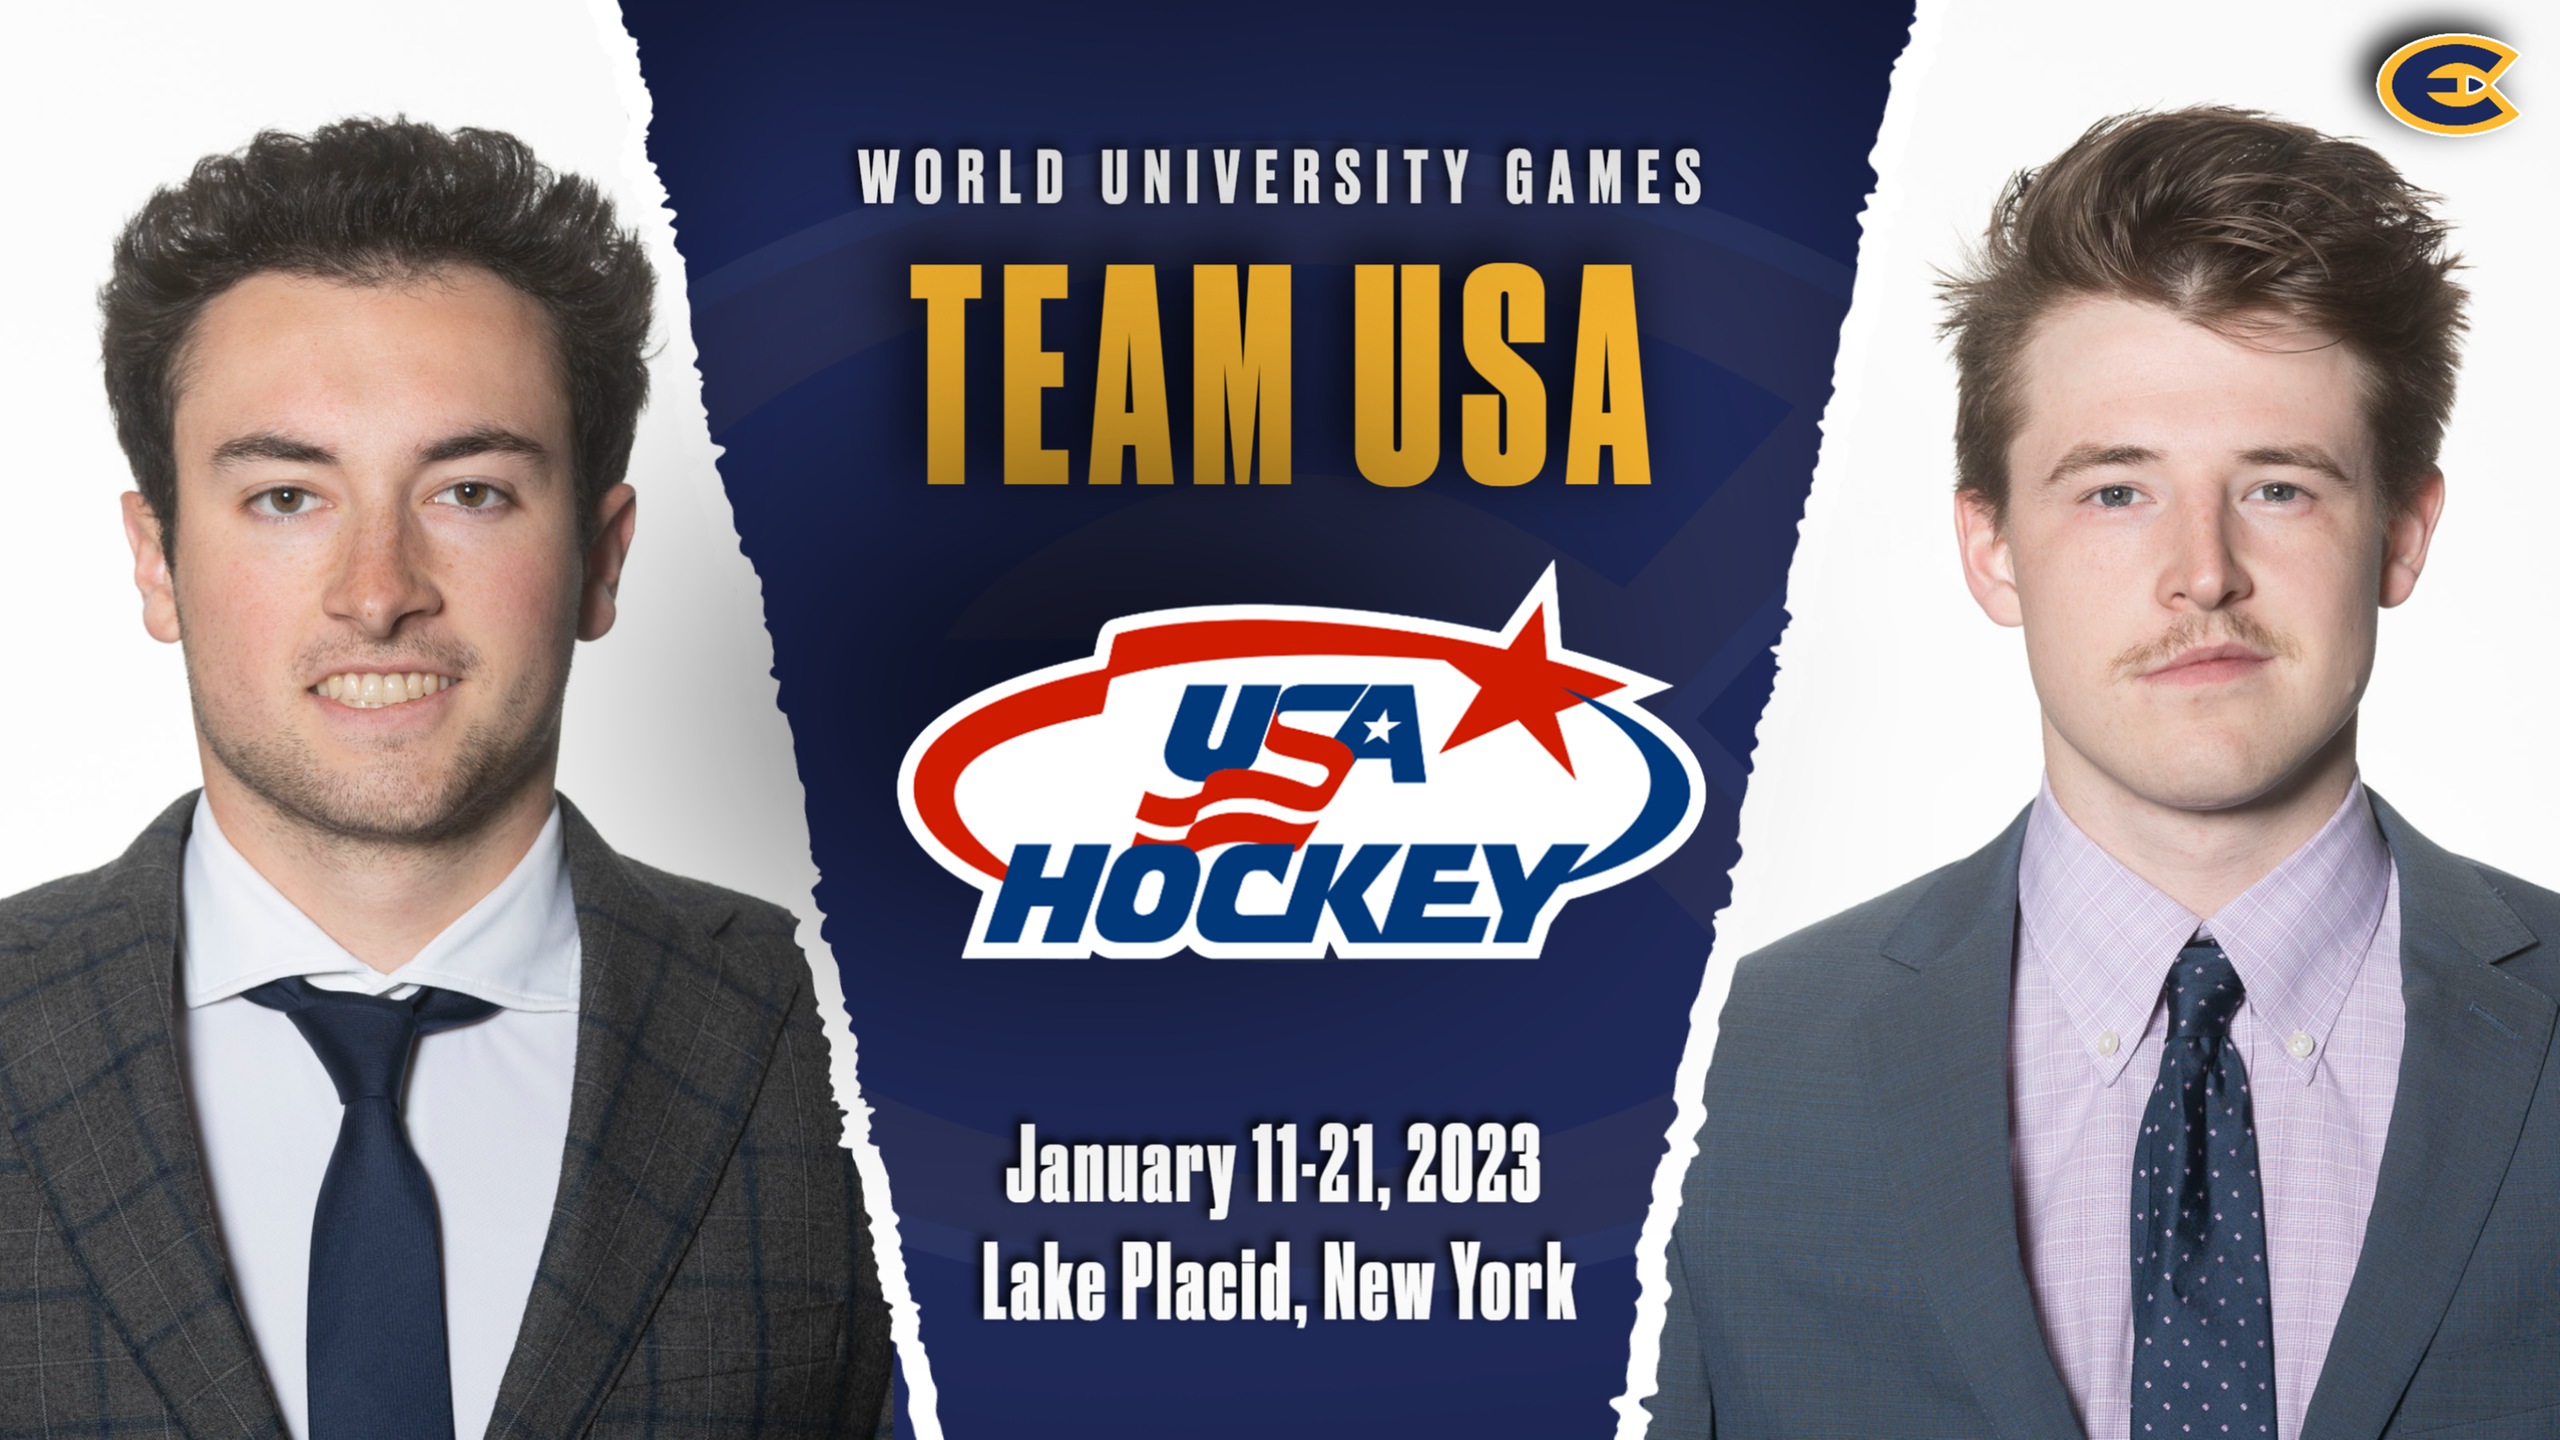 Green and Szmul Selected to Represent Team USA at World University Games